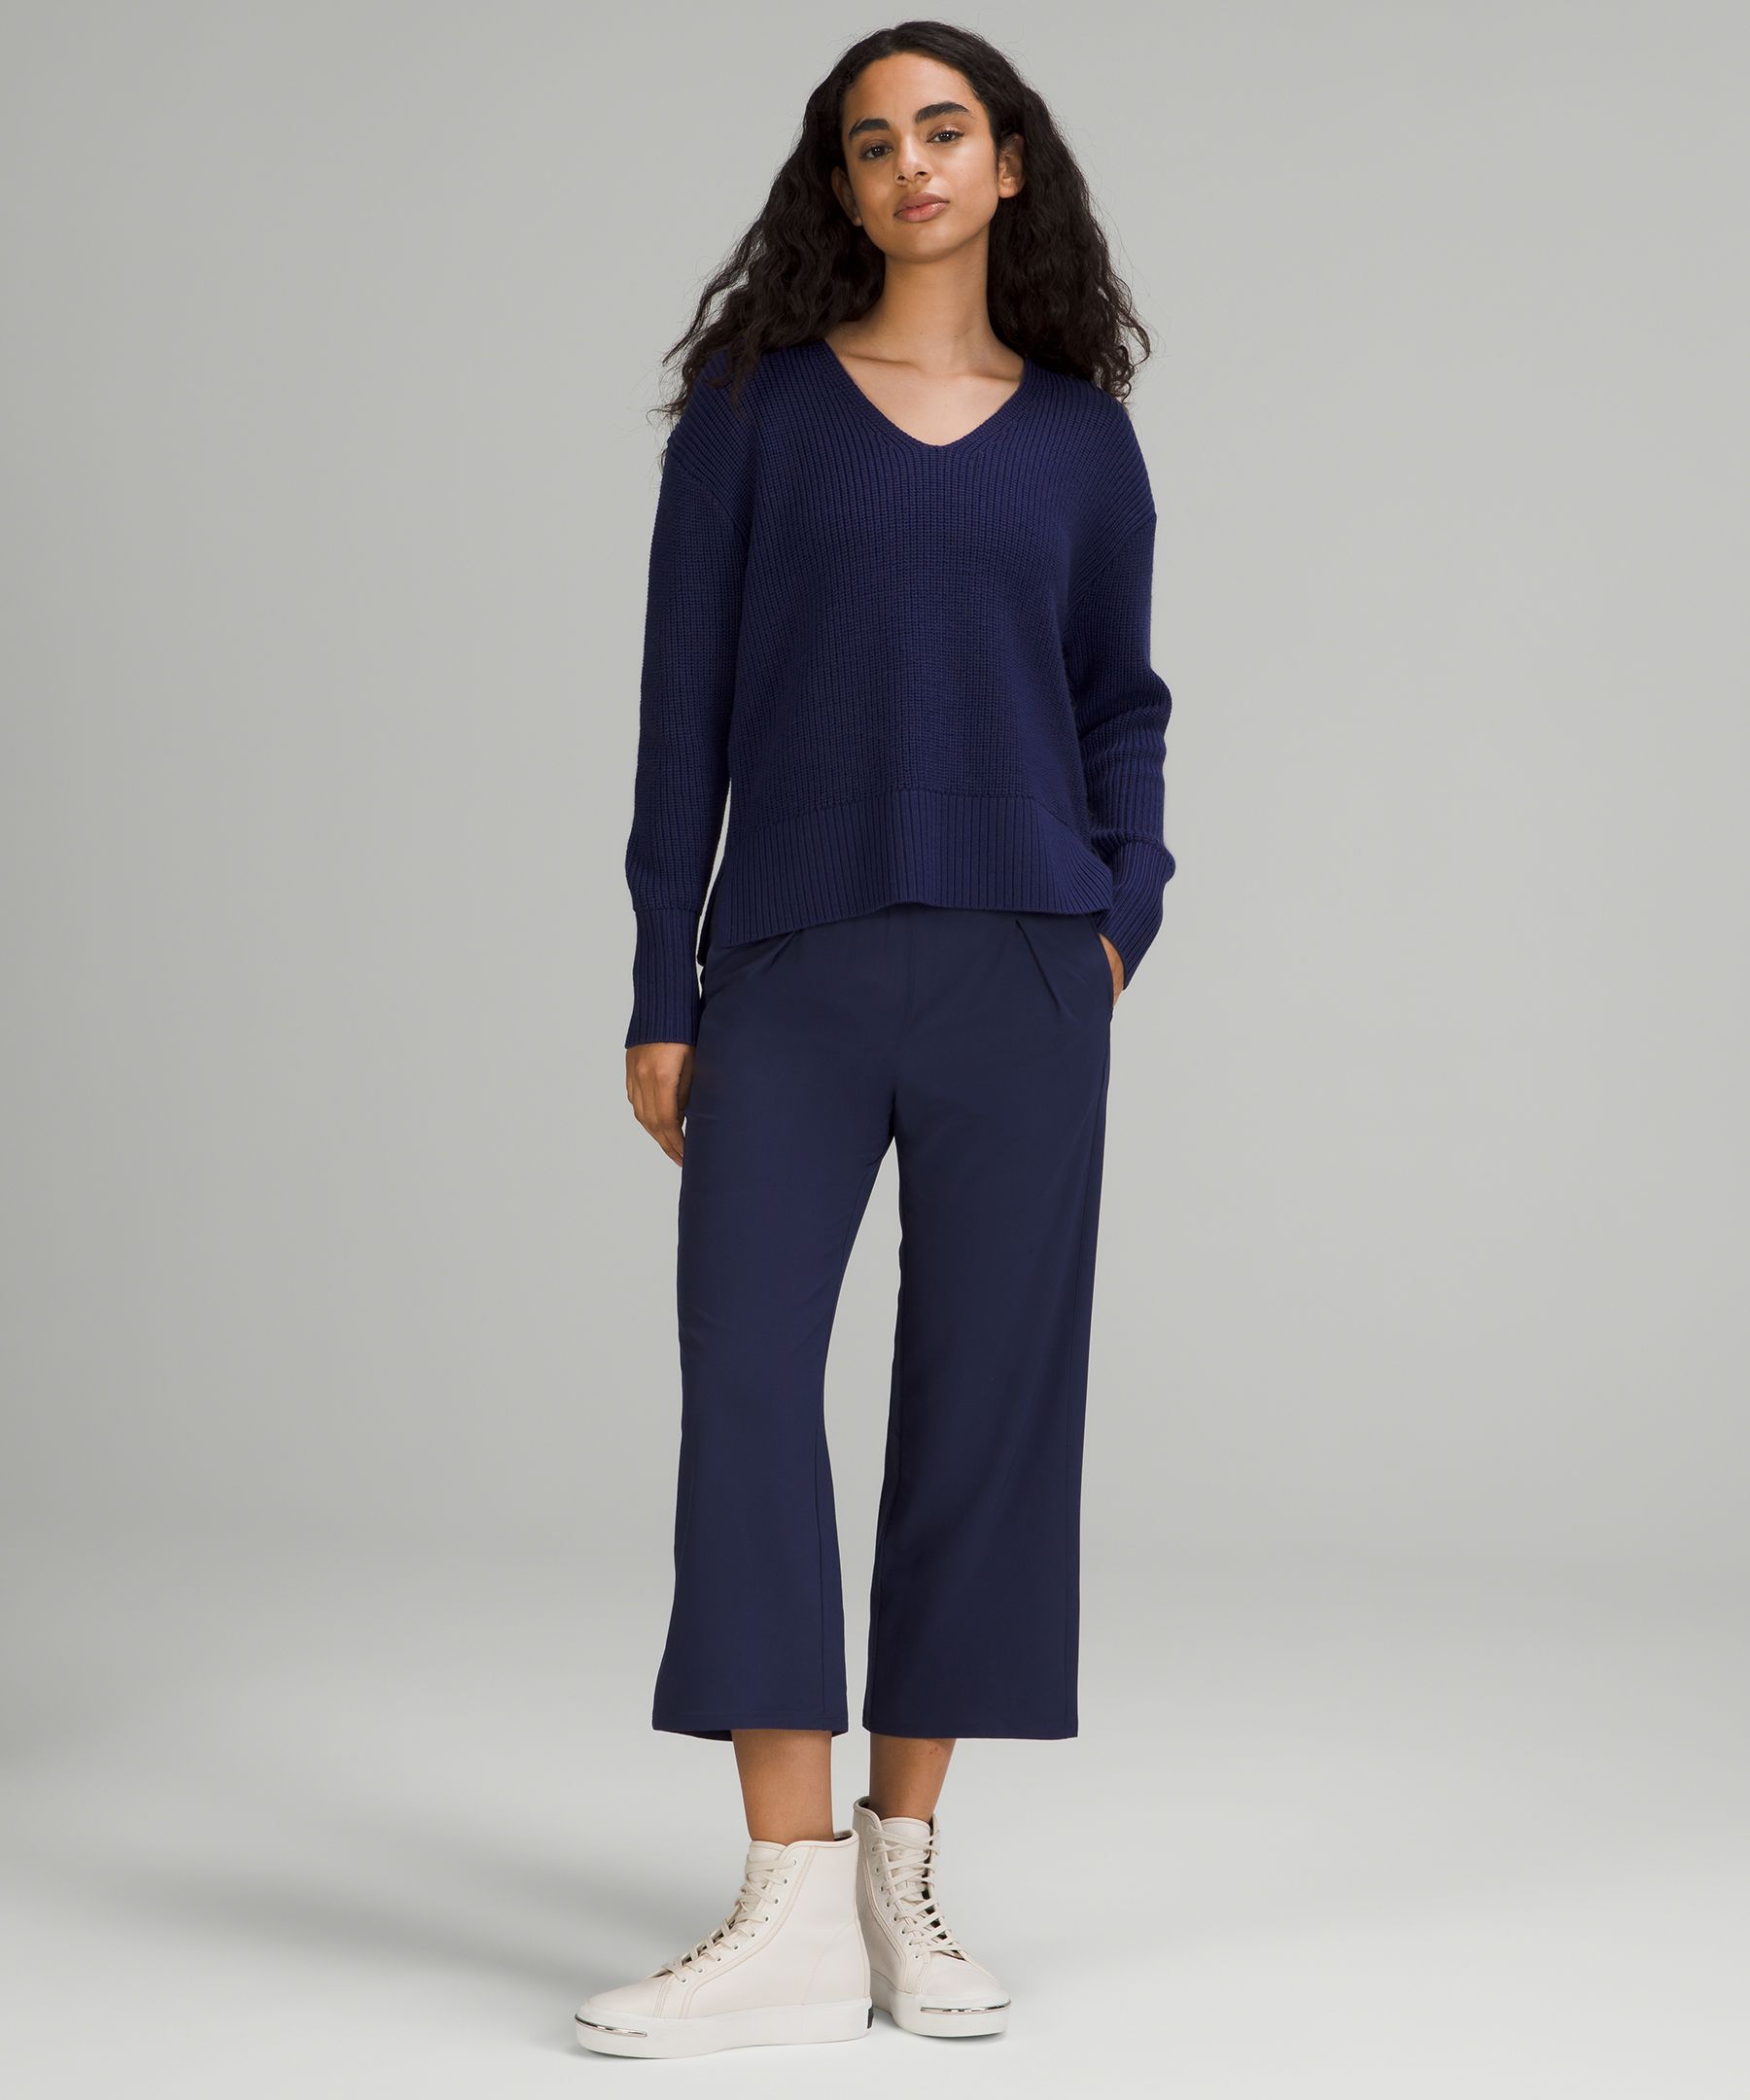 At Ease Culottes